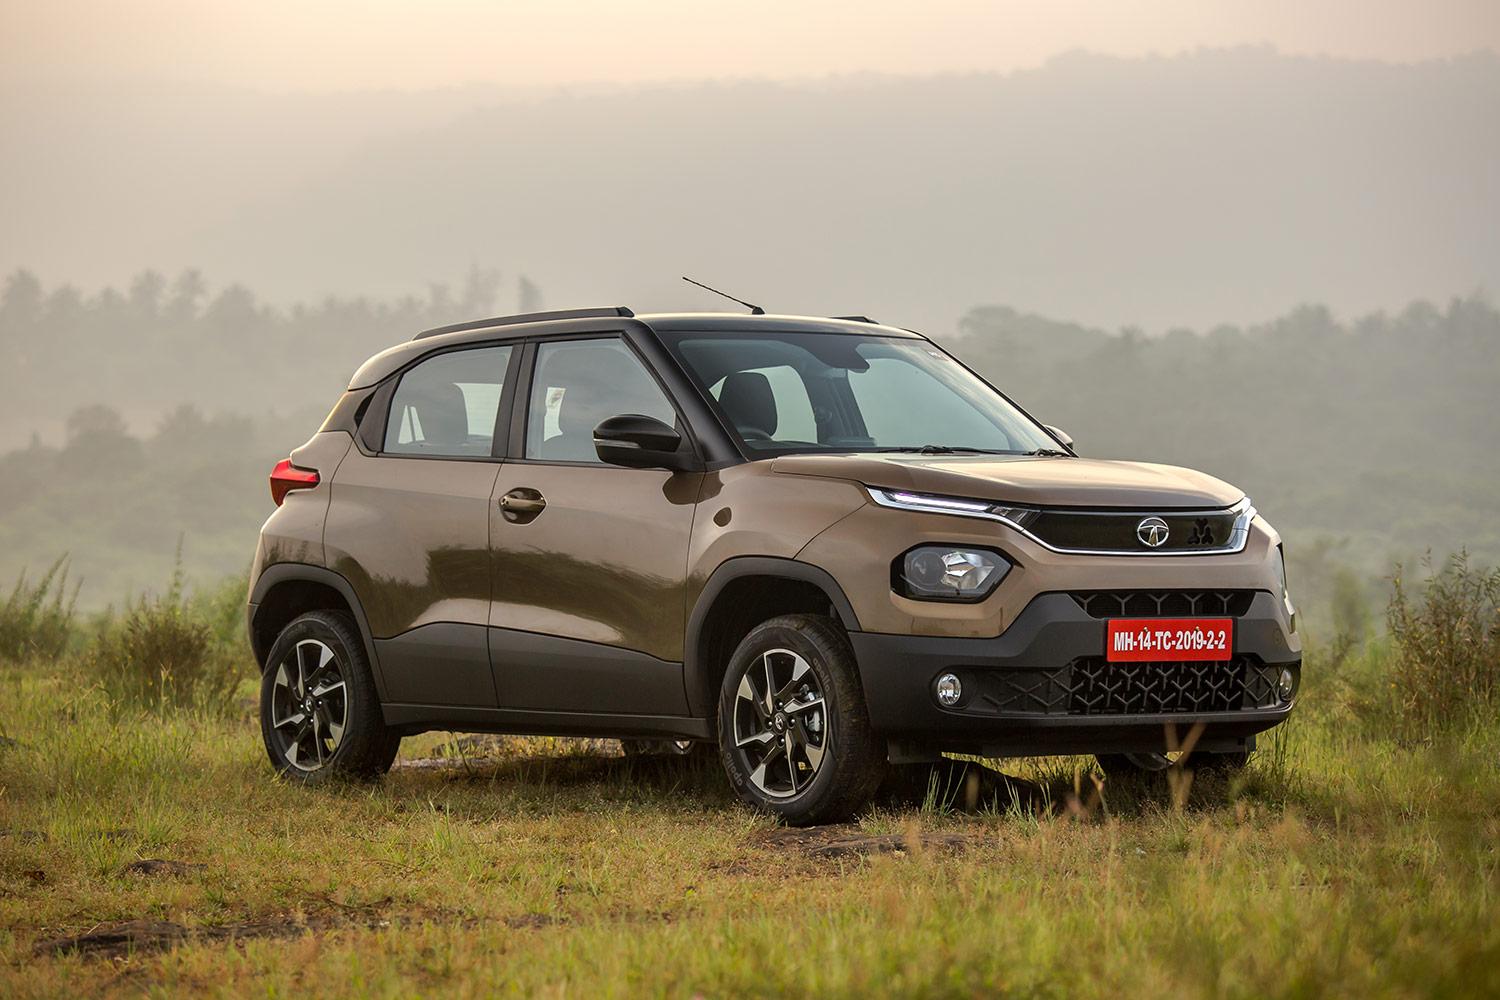 Tata Punch: A Benchmark Setter With Its Unique Size And SUV-like Appeal